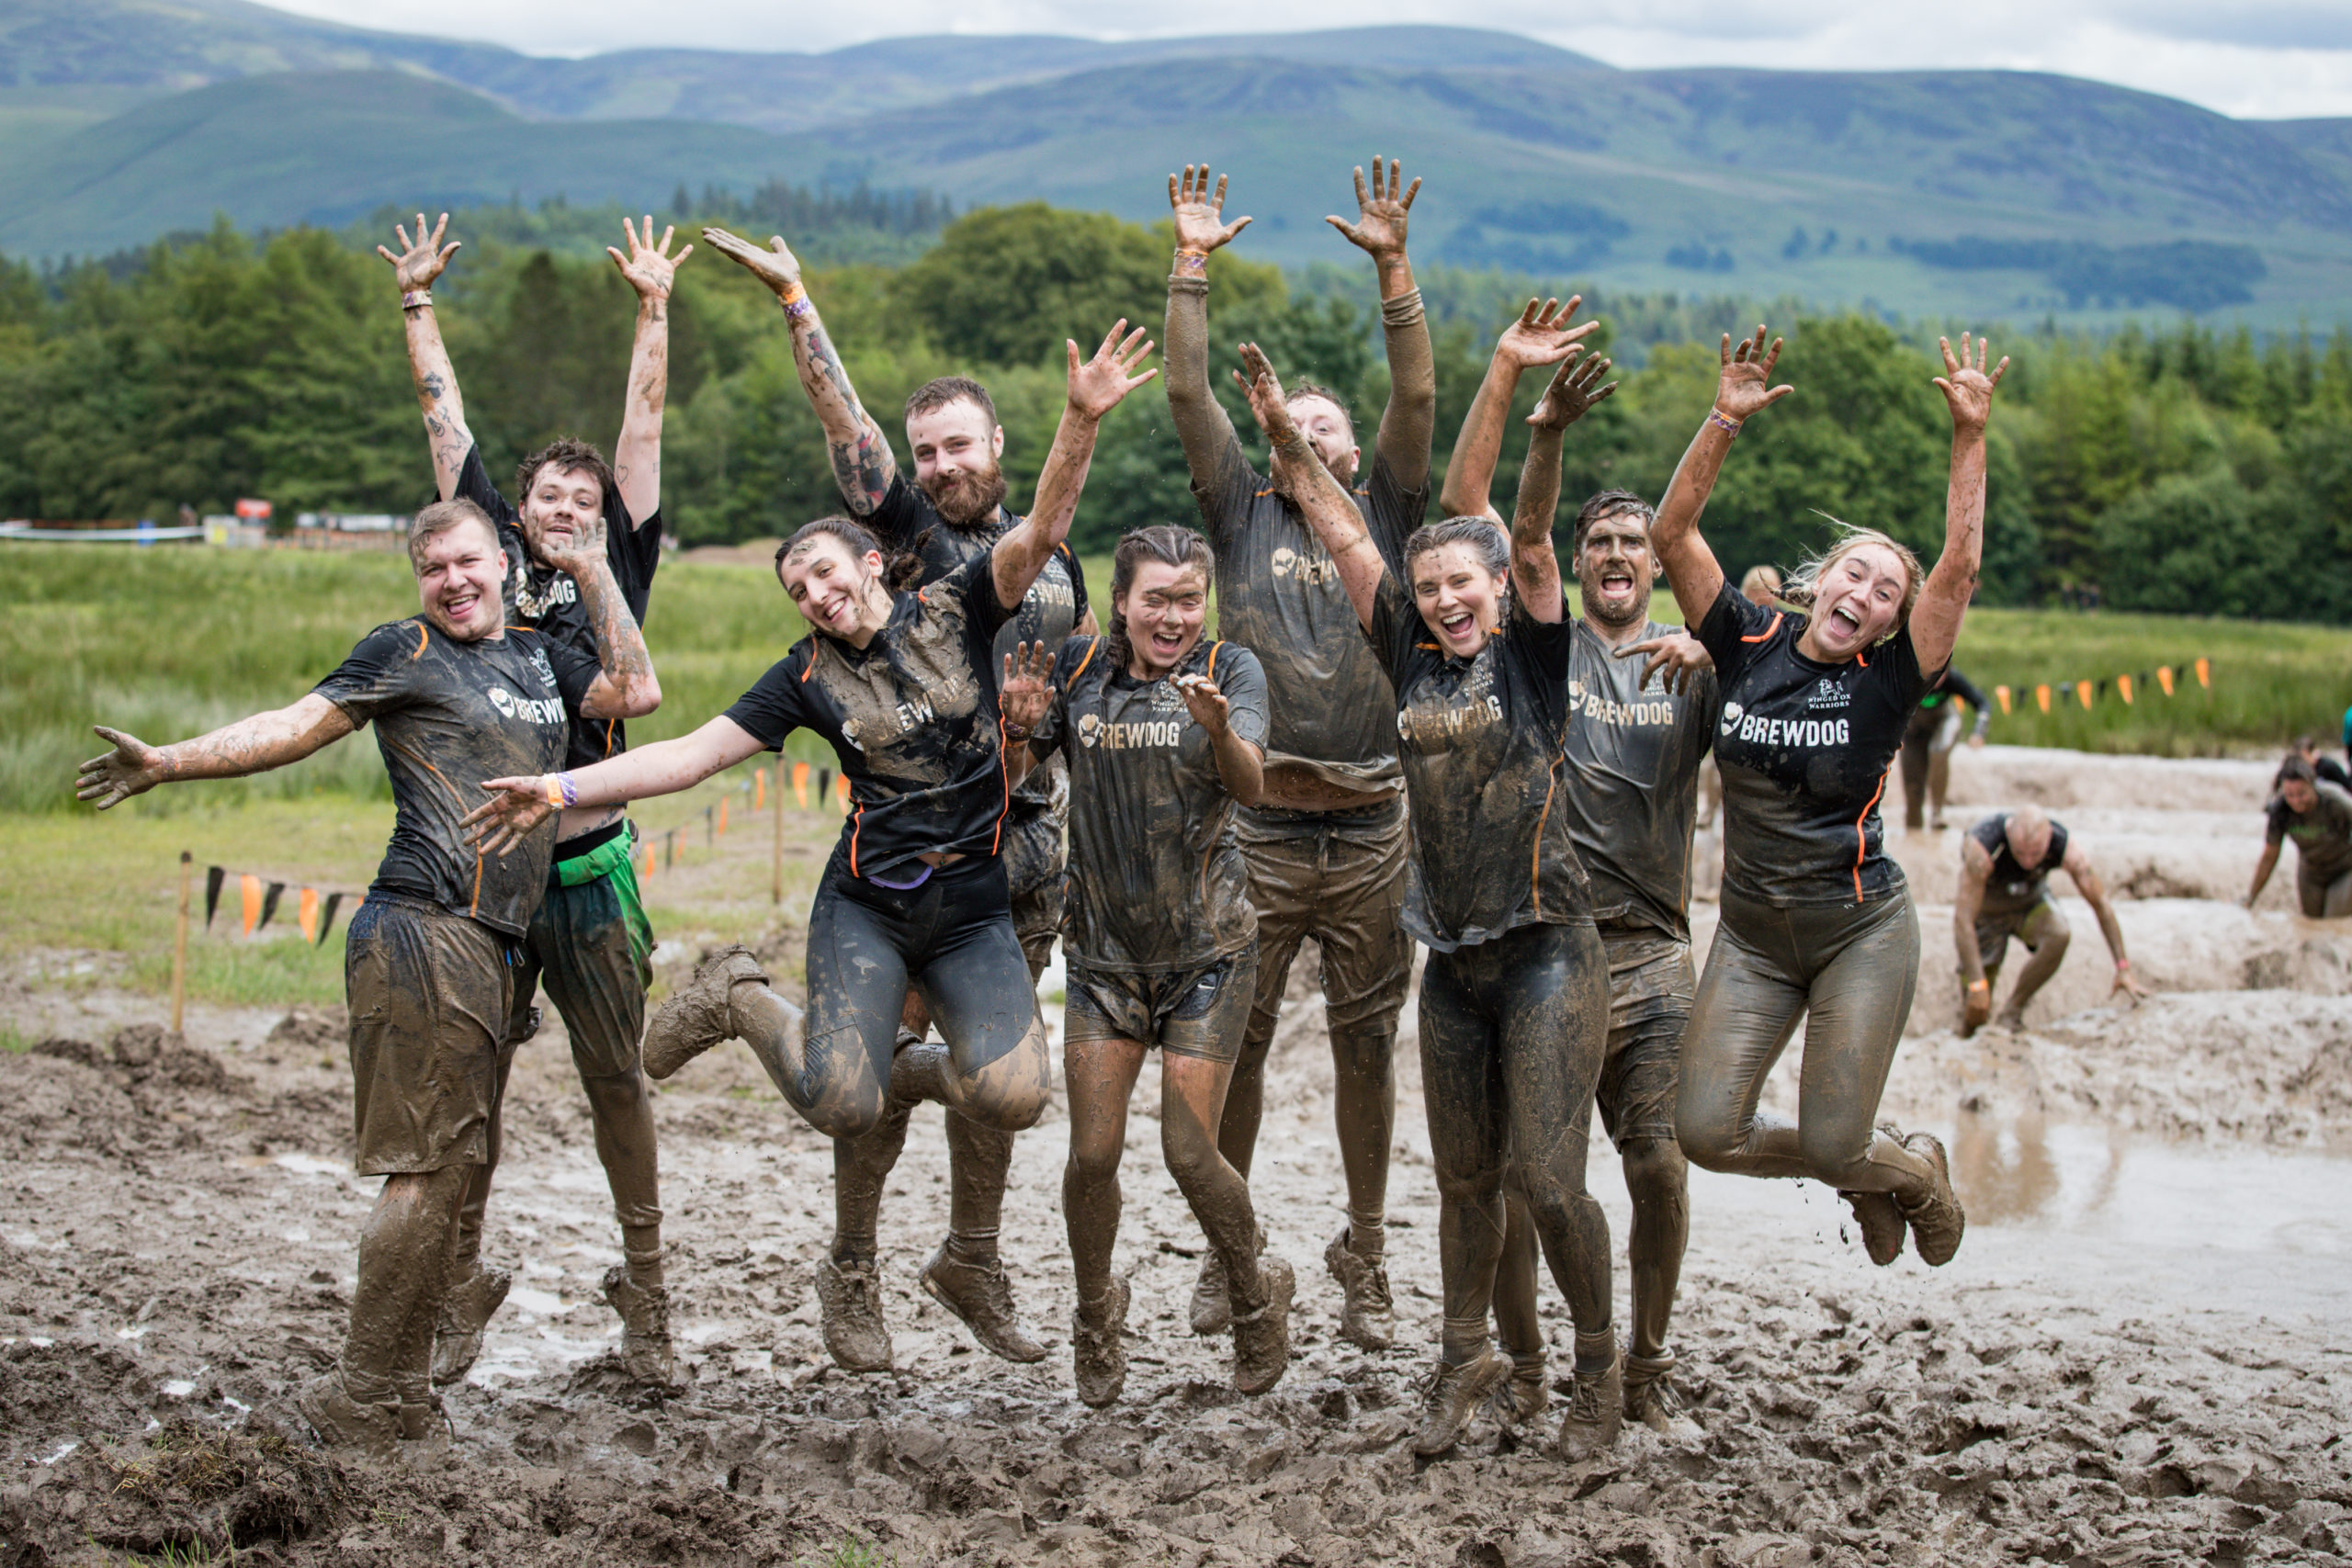 Tough Mudder UK - The World's Best Mud Run and Obstacle Course